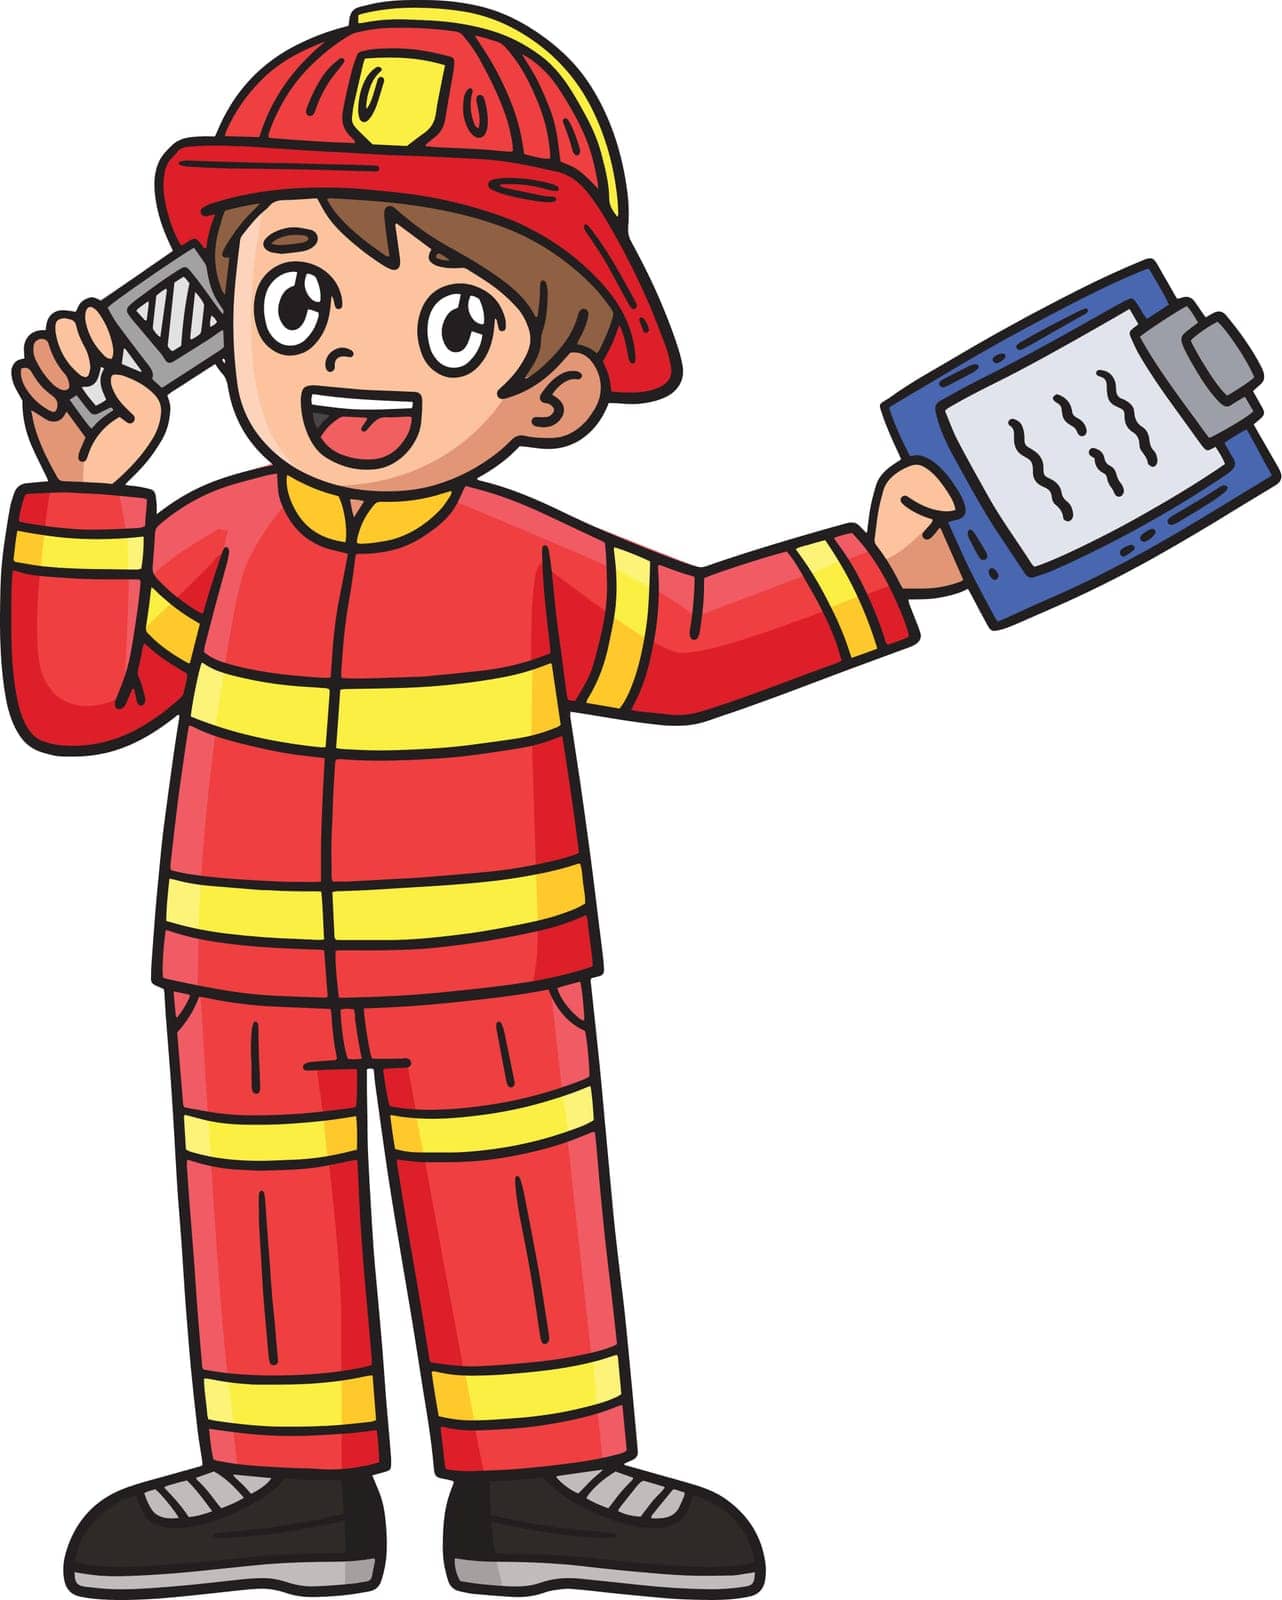 This cartoon clipart shows a Firefighter Receiving a Call illustration.